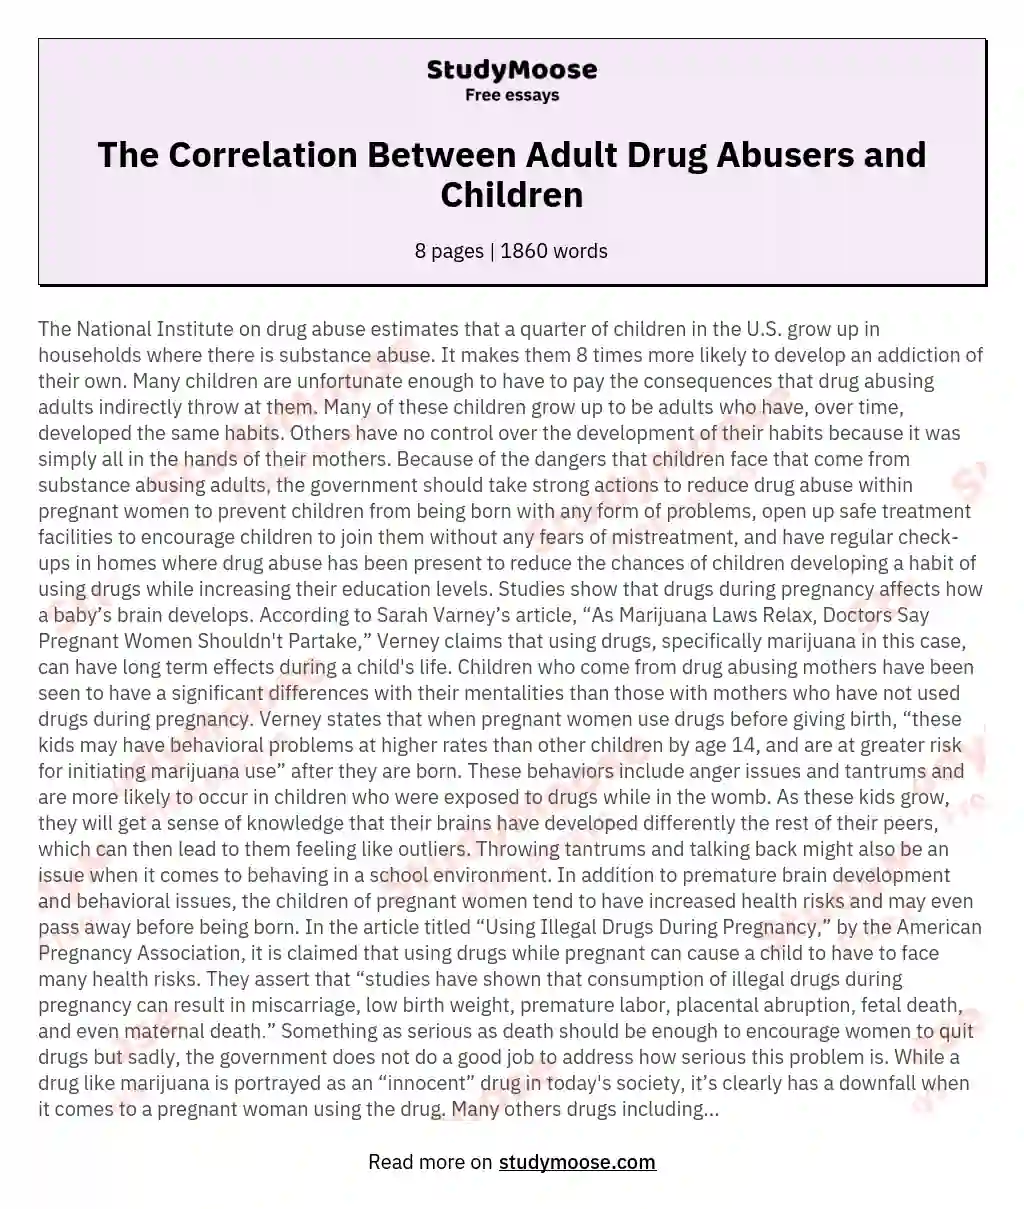 The Correlation Between Adult Drug Abusers and Children essay